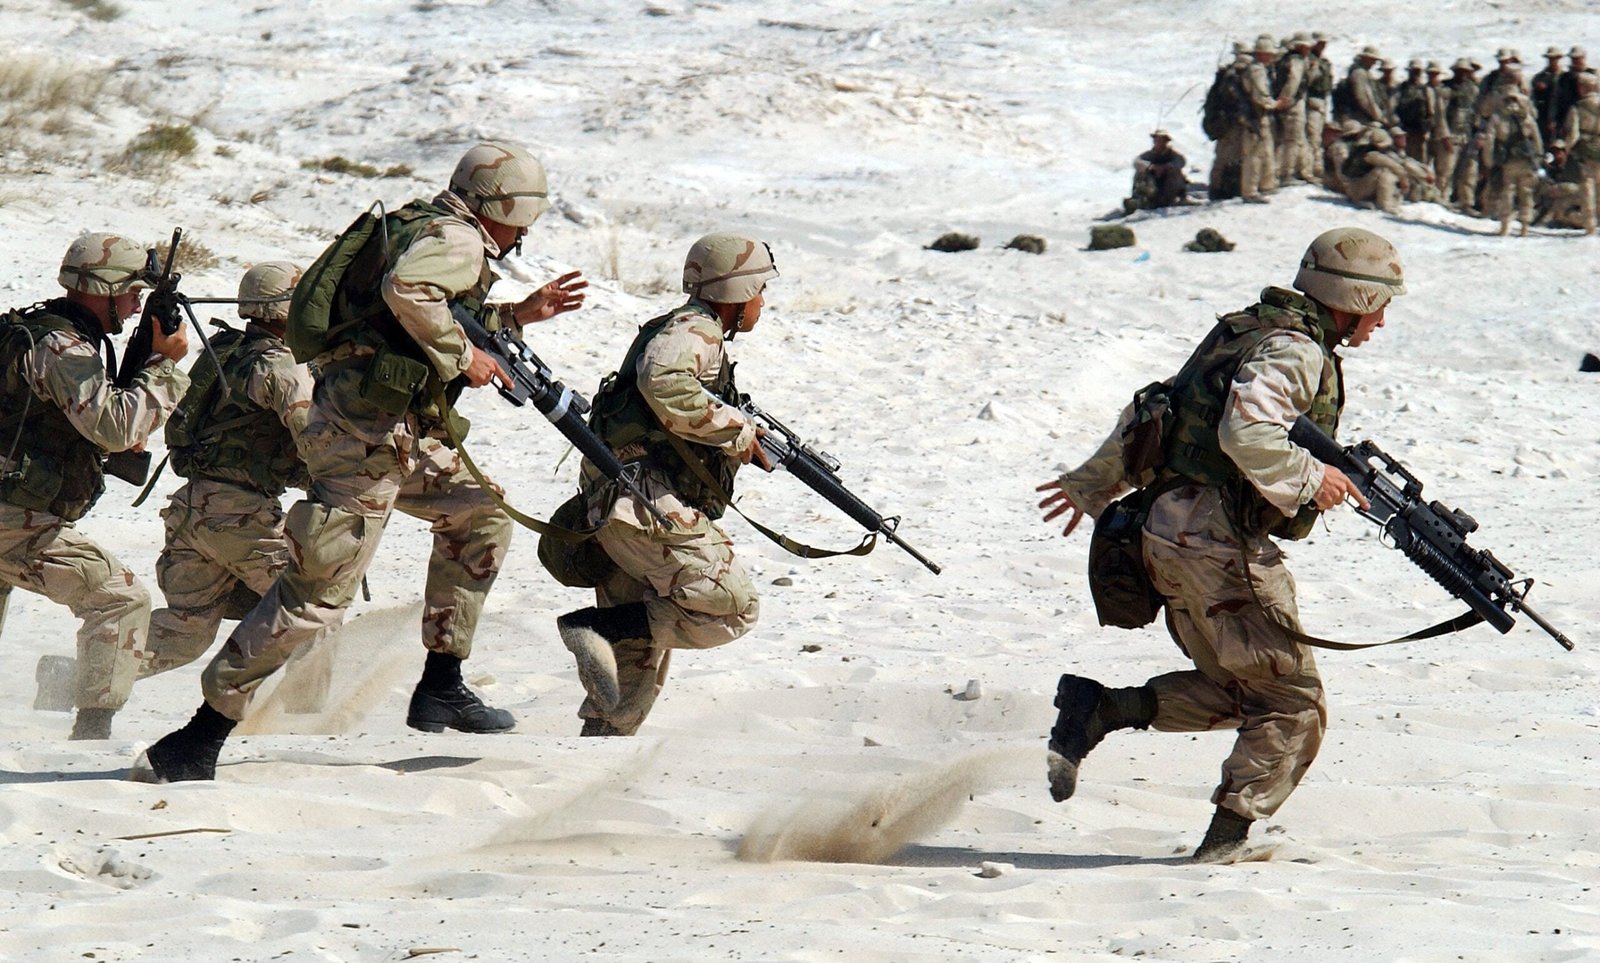 Soldiers running on sand, training for war